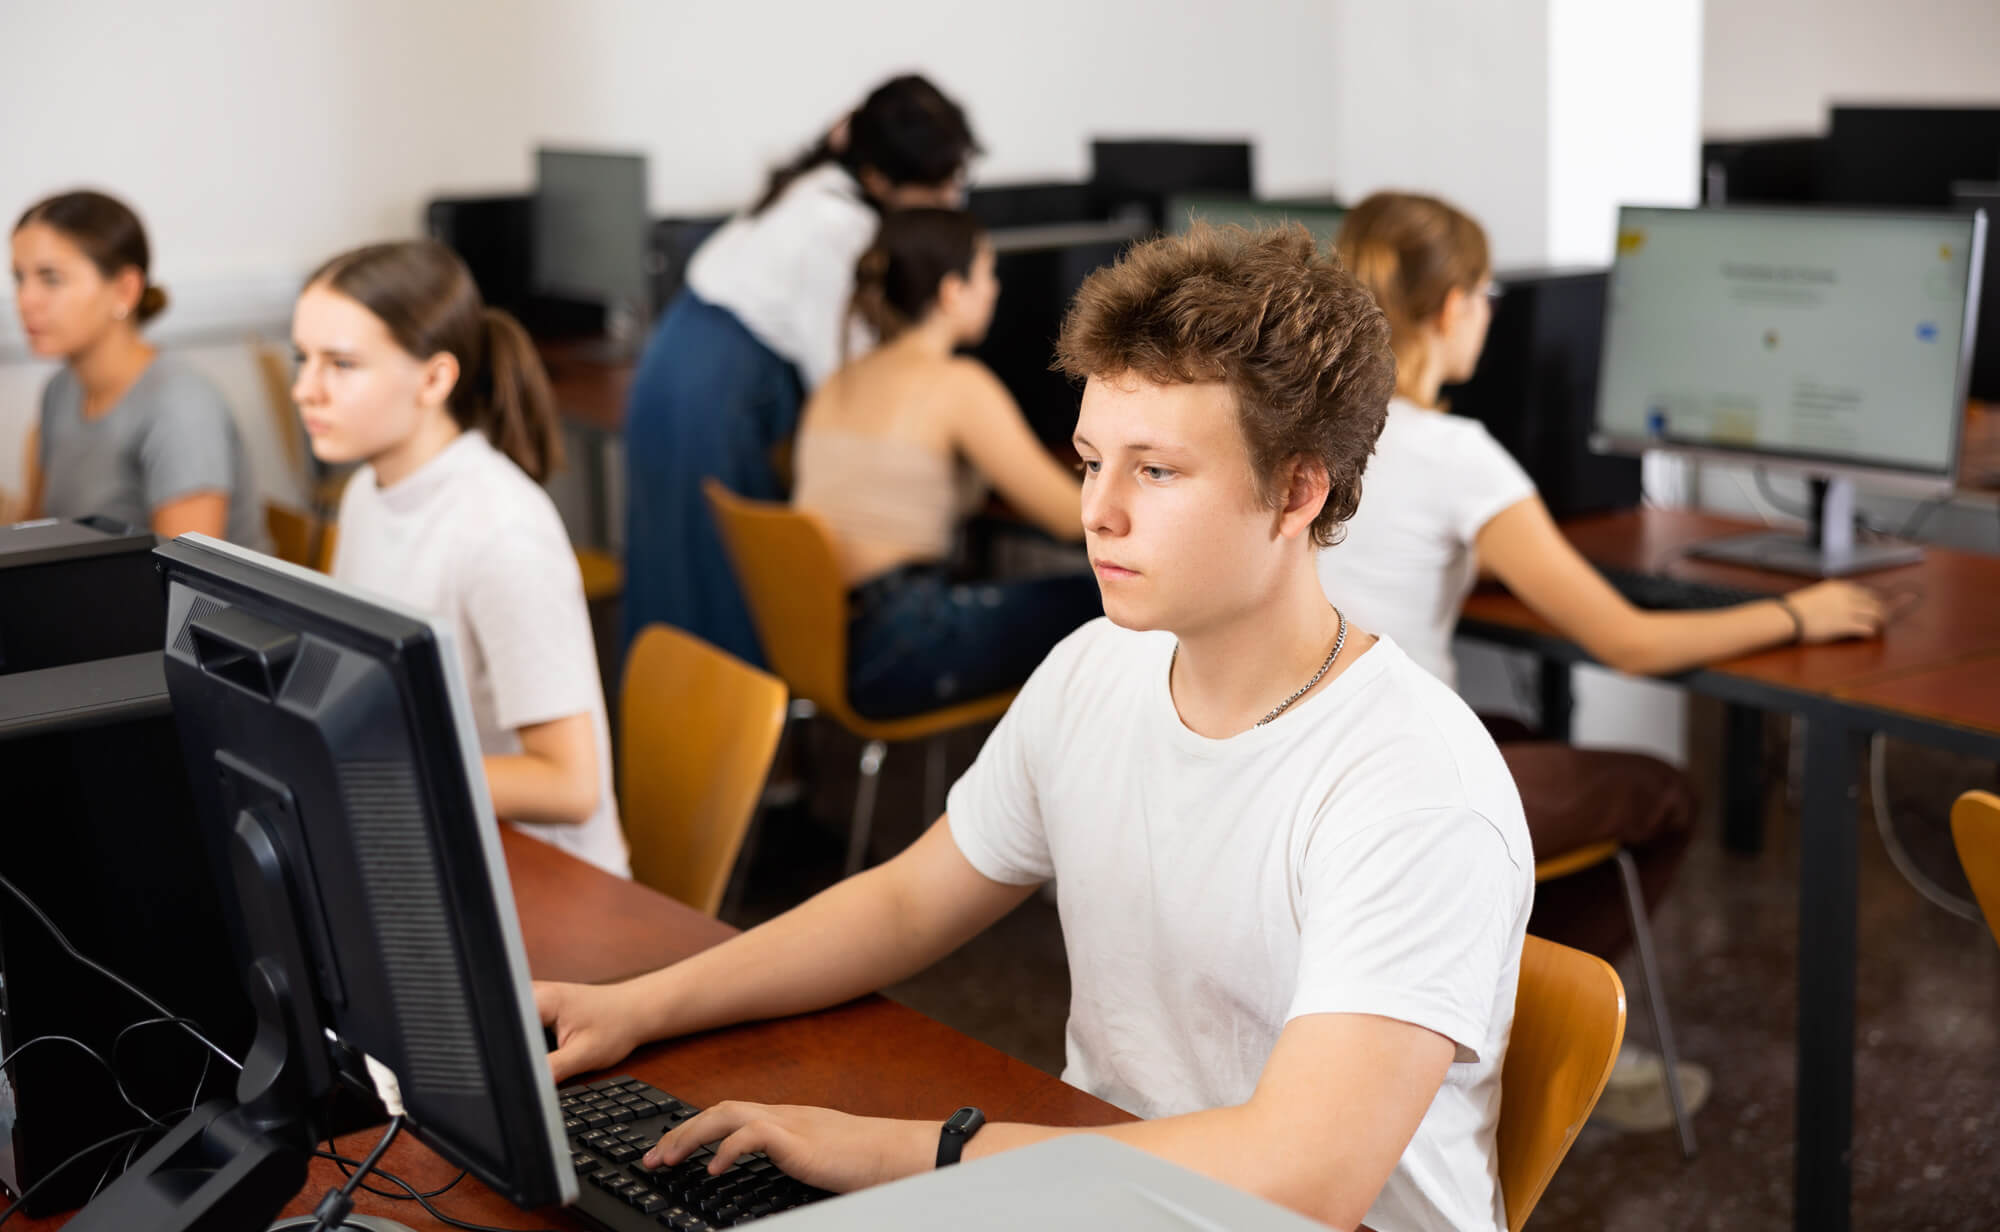 Students using desktop computers in a room.